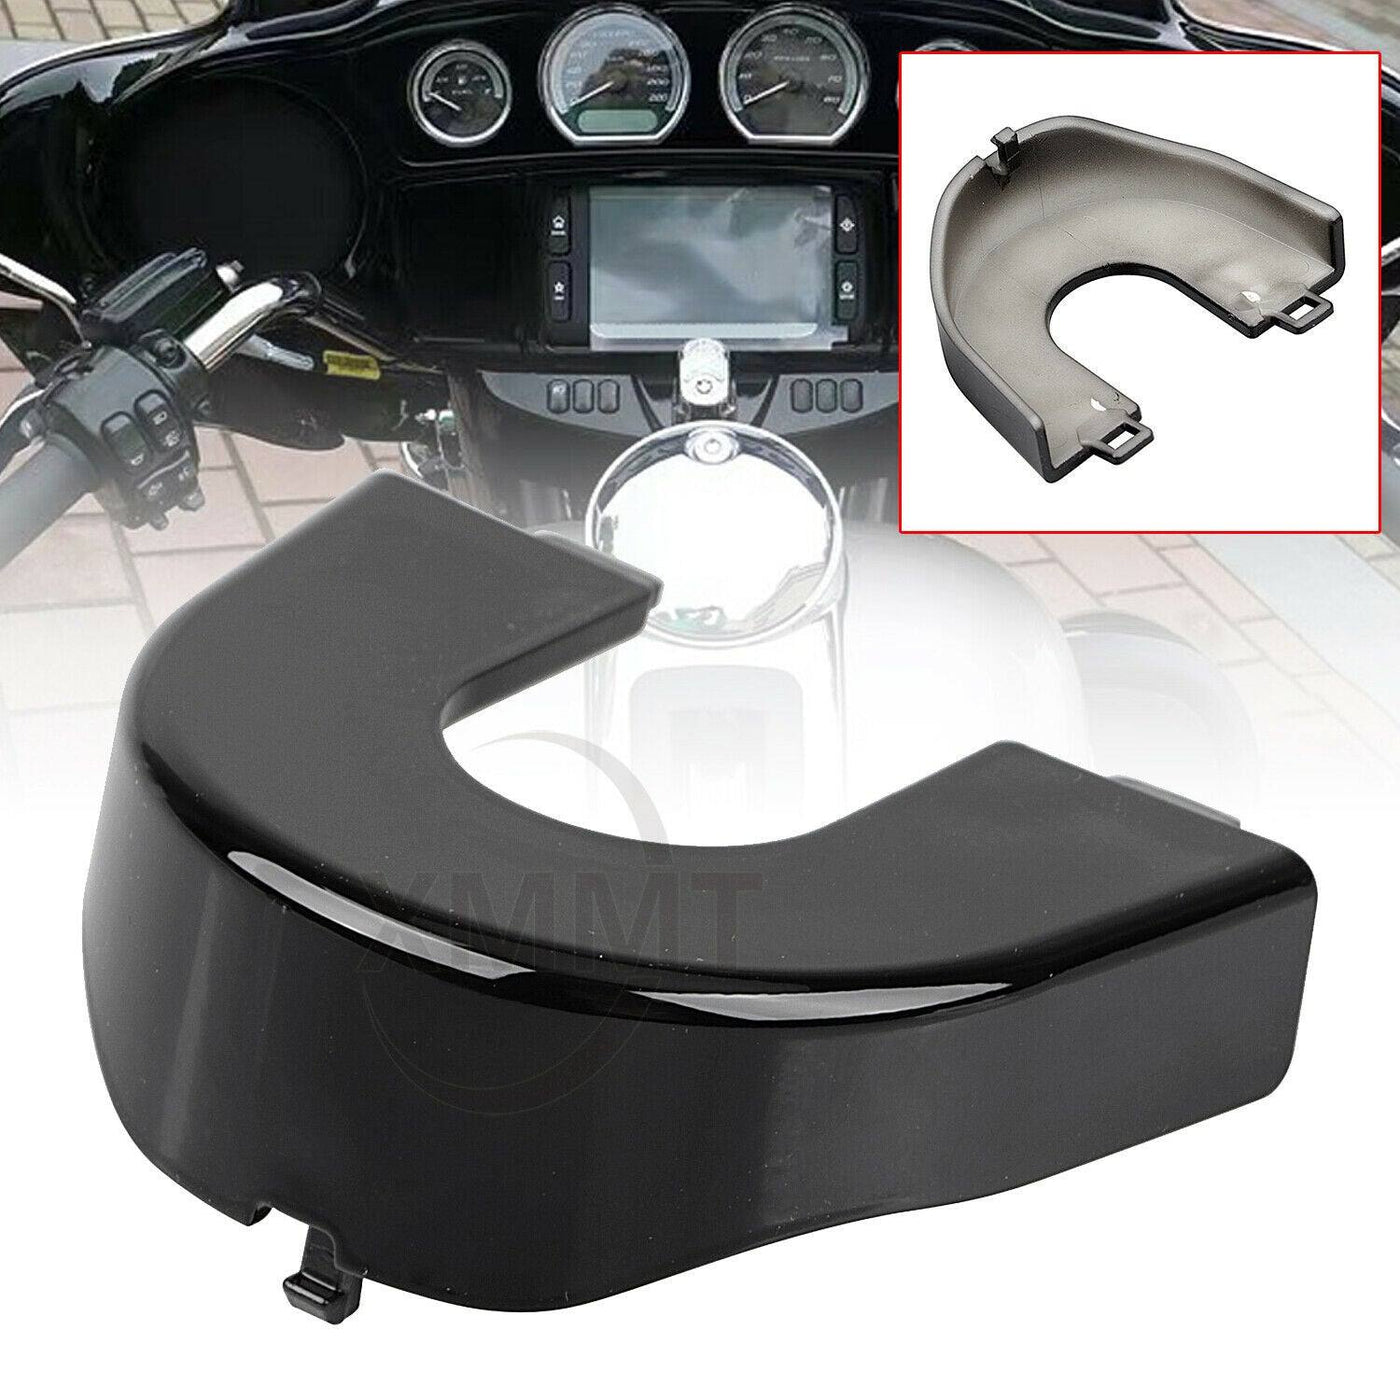 Gloss Black Ignition Switch Panel Trim For Harley Road Glide Special FLTRXS US - Moto Life Products